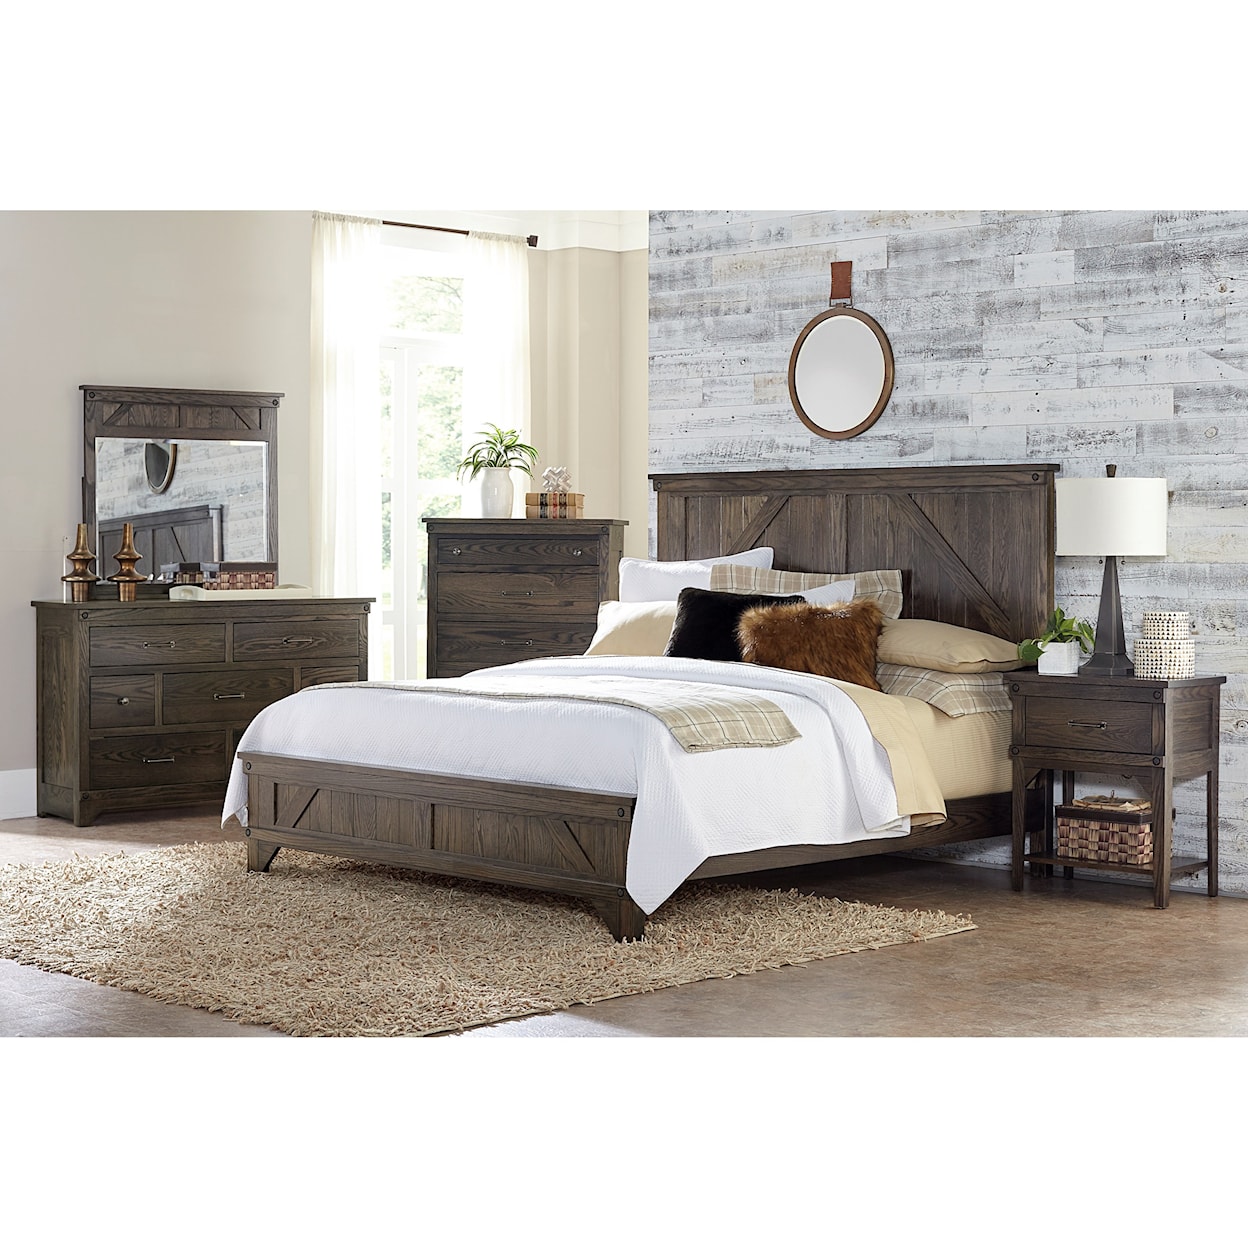 Amish Impressions by Fusion Designs Cedar Lakes King Bedroom Group